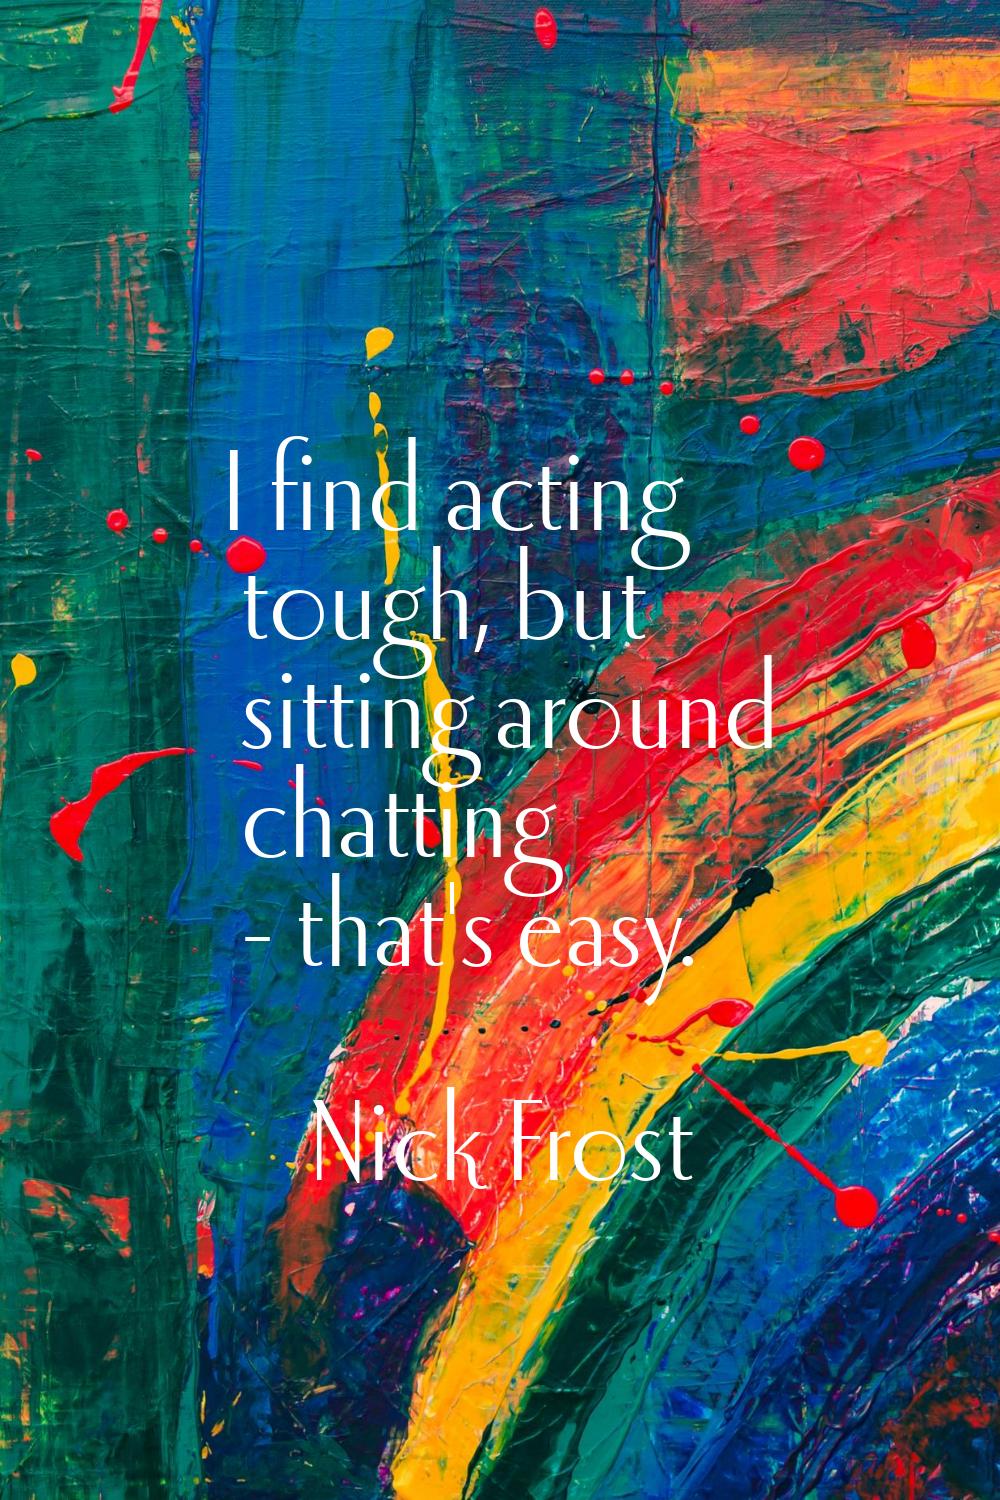 I find acting tough, but sitting around chatting - that's easy.